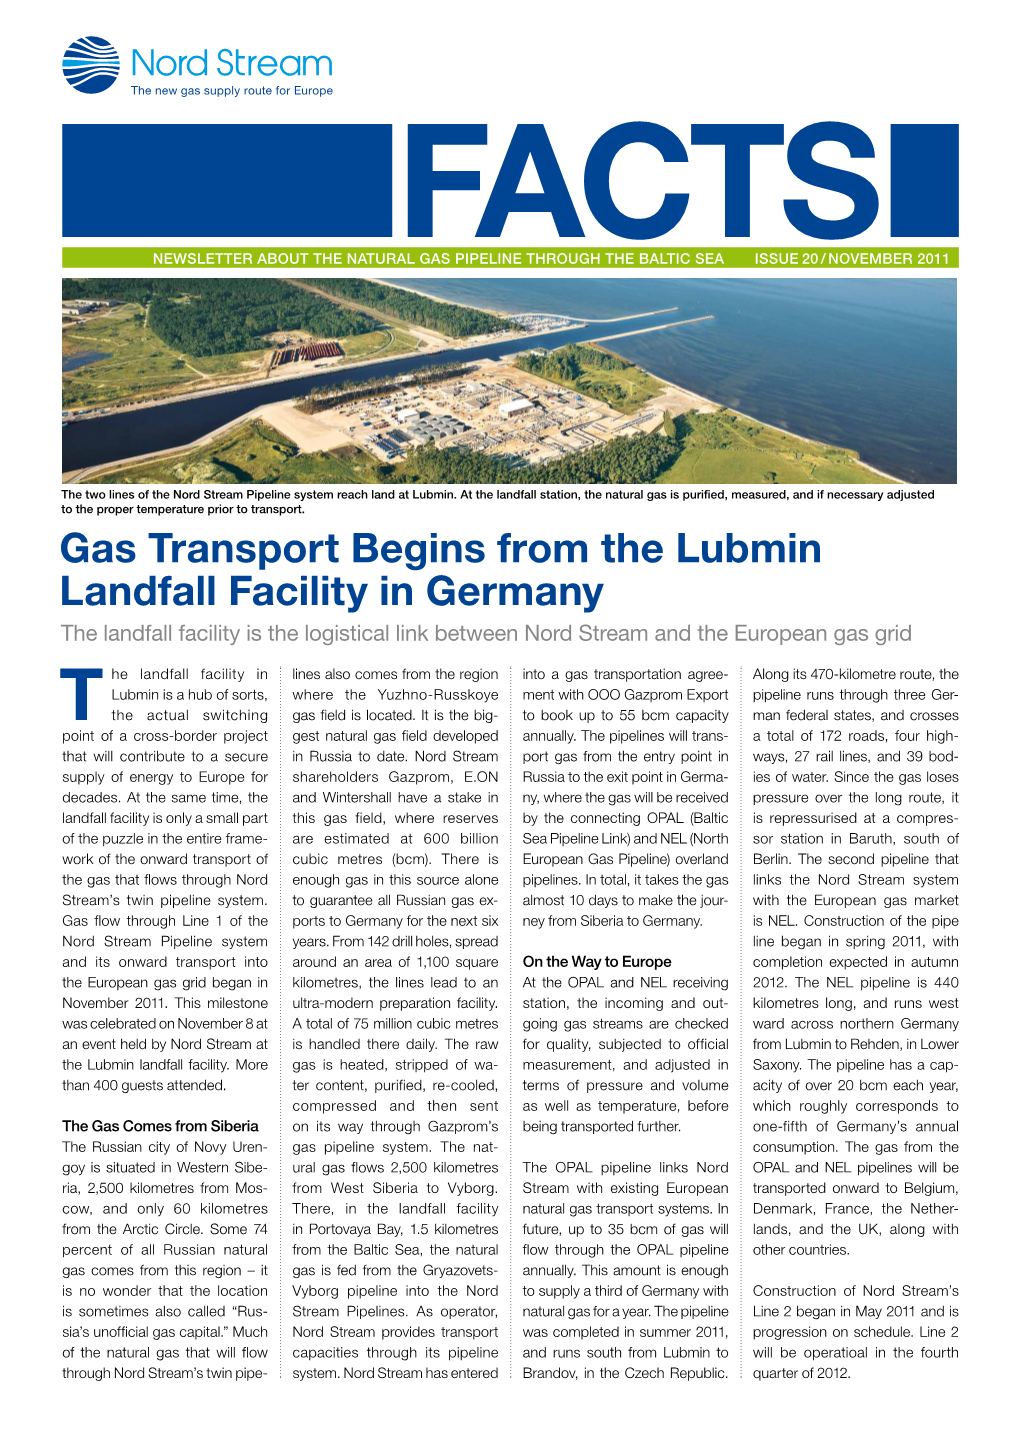 Gas Transport Begins from the Lubmin Landfall Facility in Germany the Landfall Facility Is the Logistical Link Between Nord Stream and the European Gas Grid